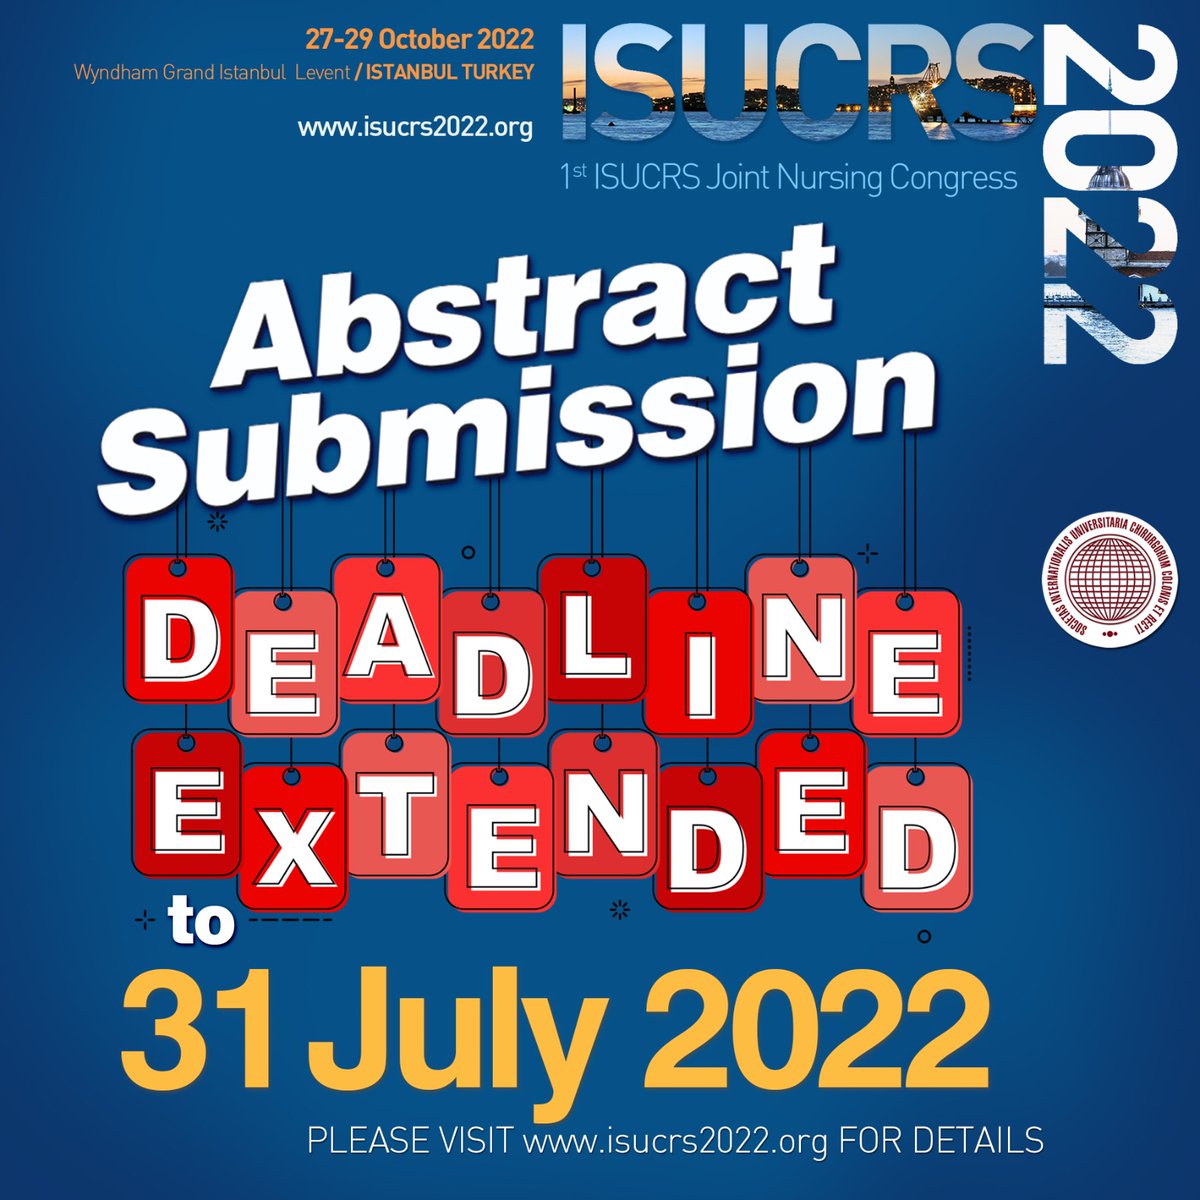 📢 Abstract submisson deadline is extended to 31 July 2022 due to popular demand. You can submit your abstracts online by the end of this month. Please visit isucrs2022.org Thank you for your great interest! #isucrs #isucrs2022 #isucrsturkey